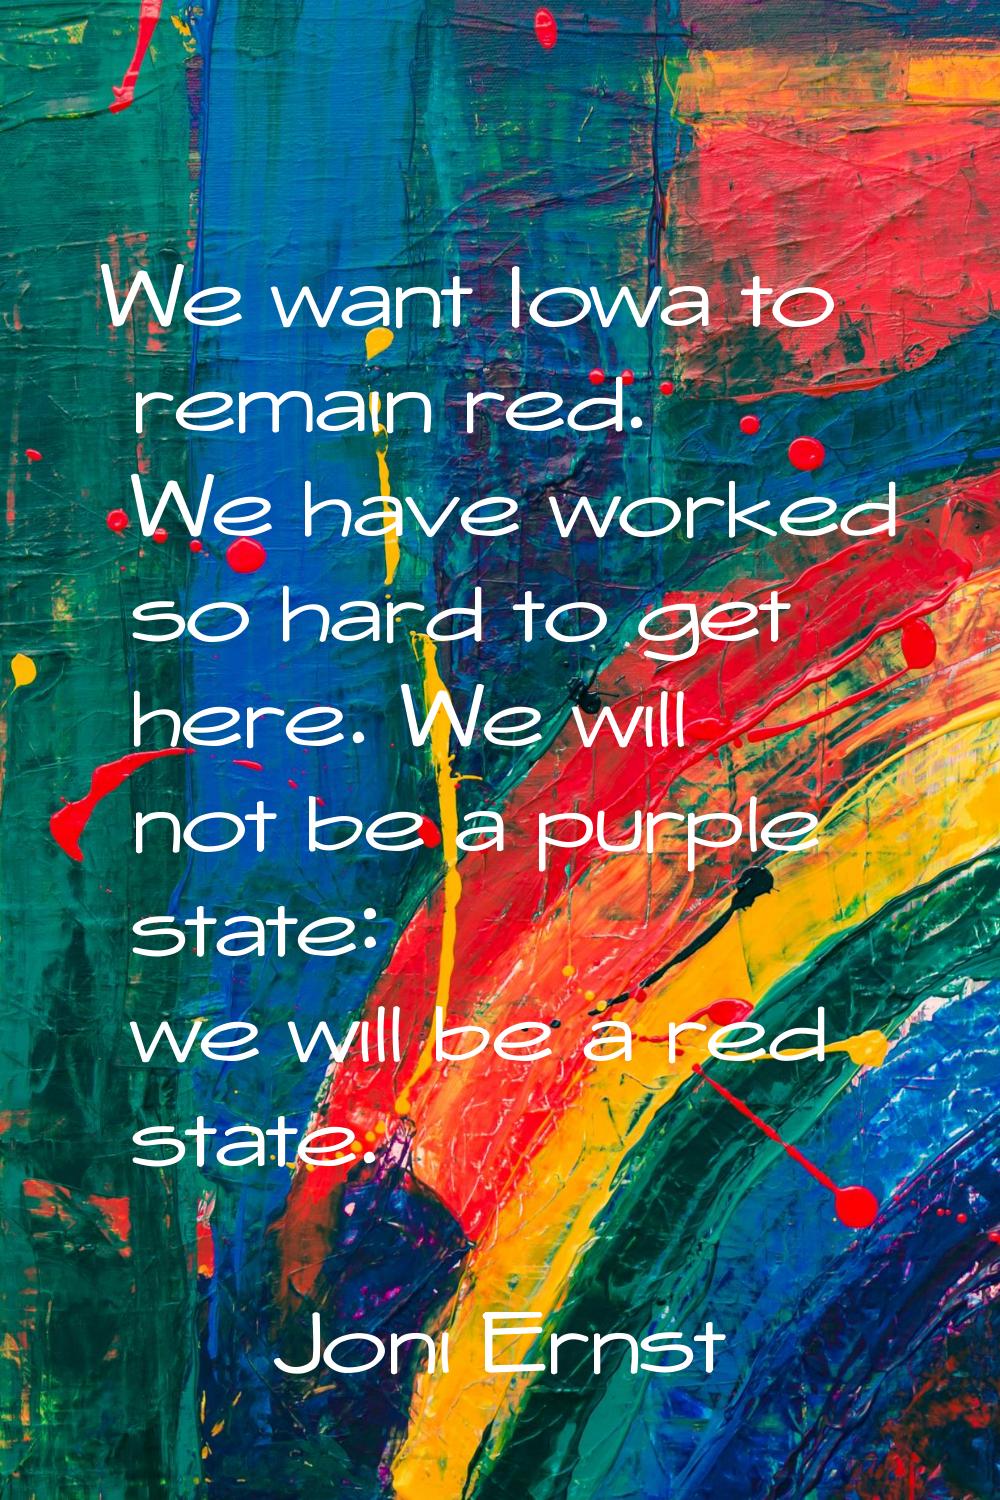 We want Iowa to remain red. We have worked so hard to get here. We will not be a purple state: we w